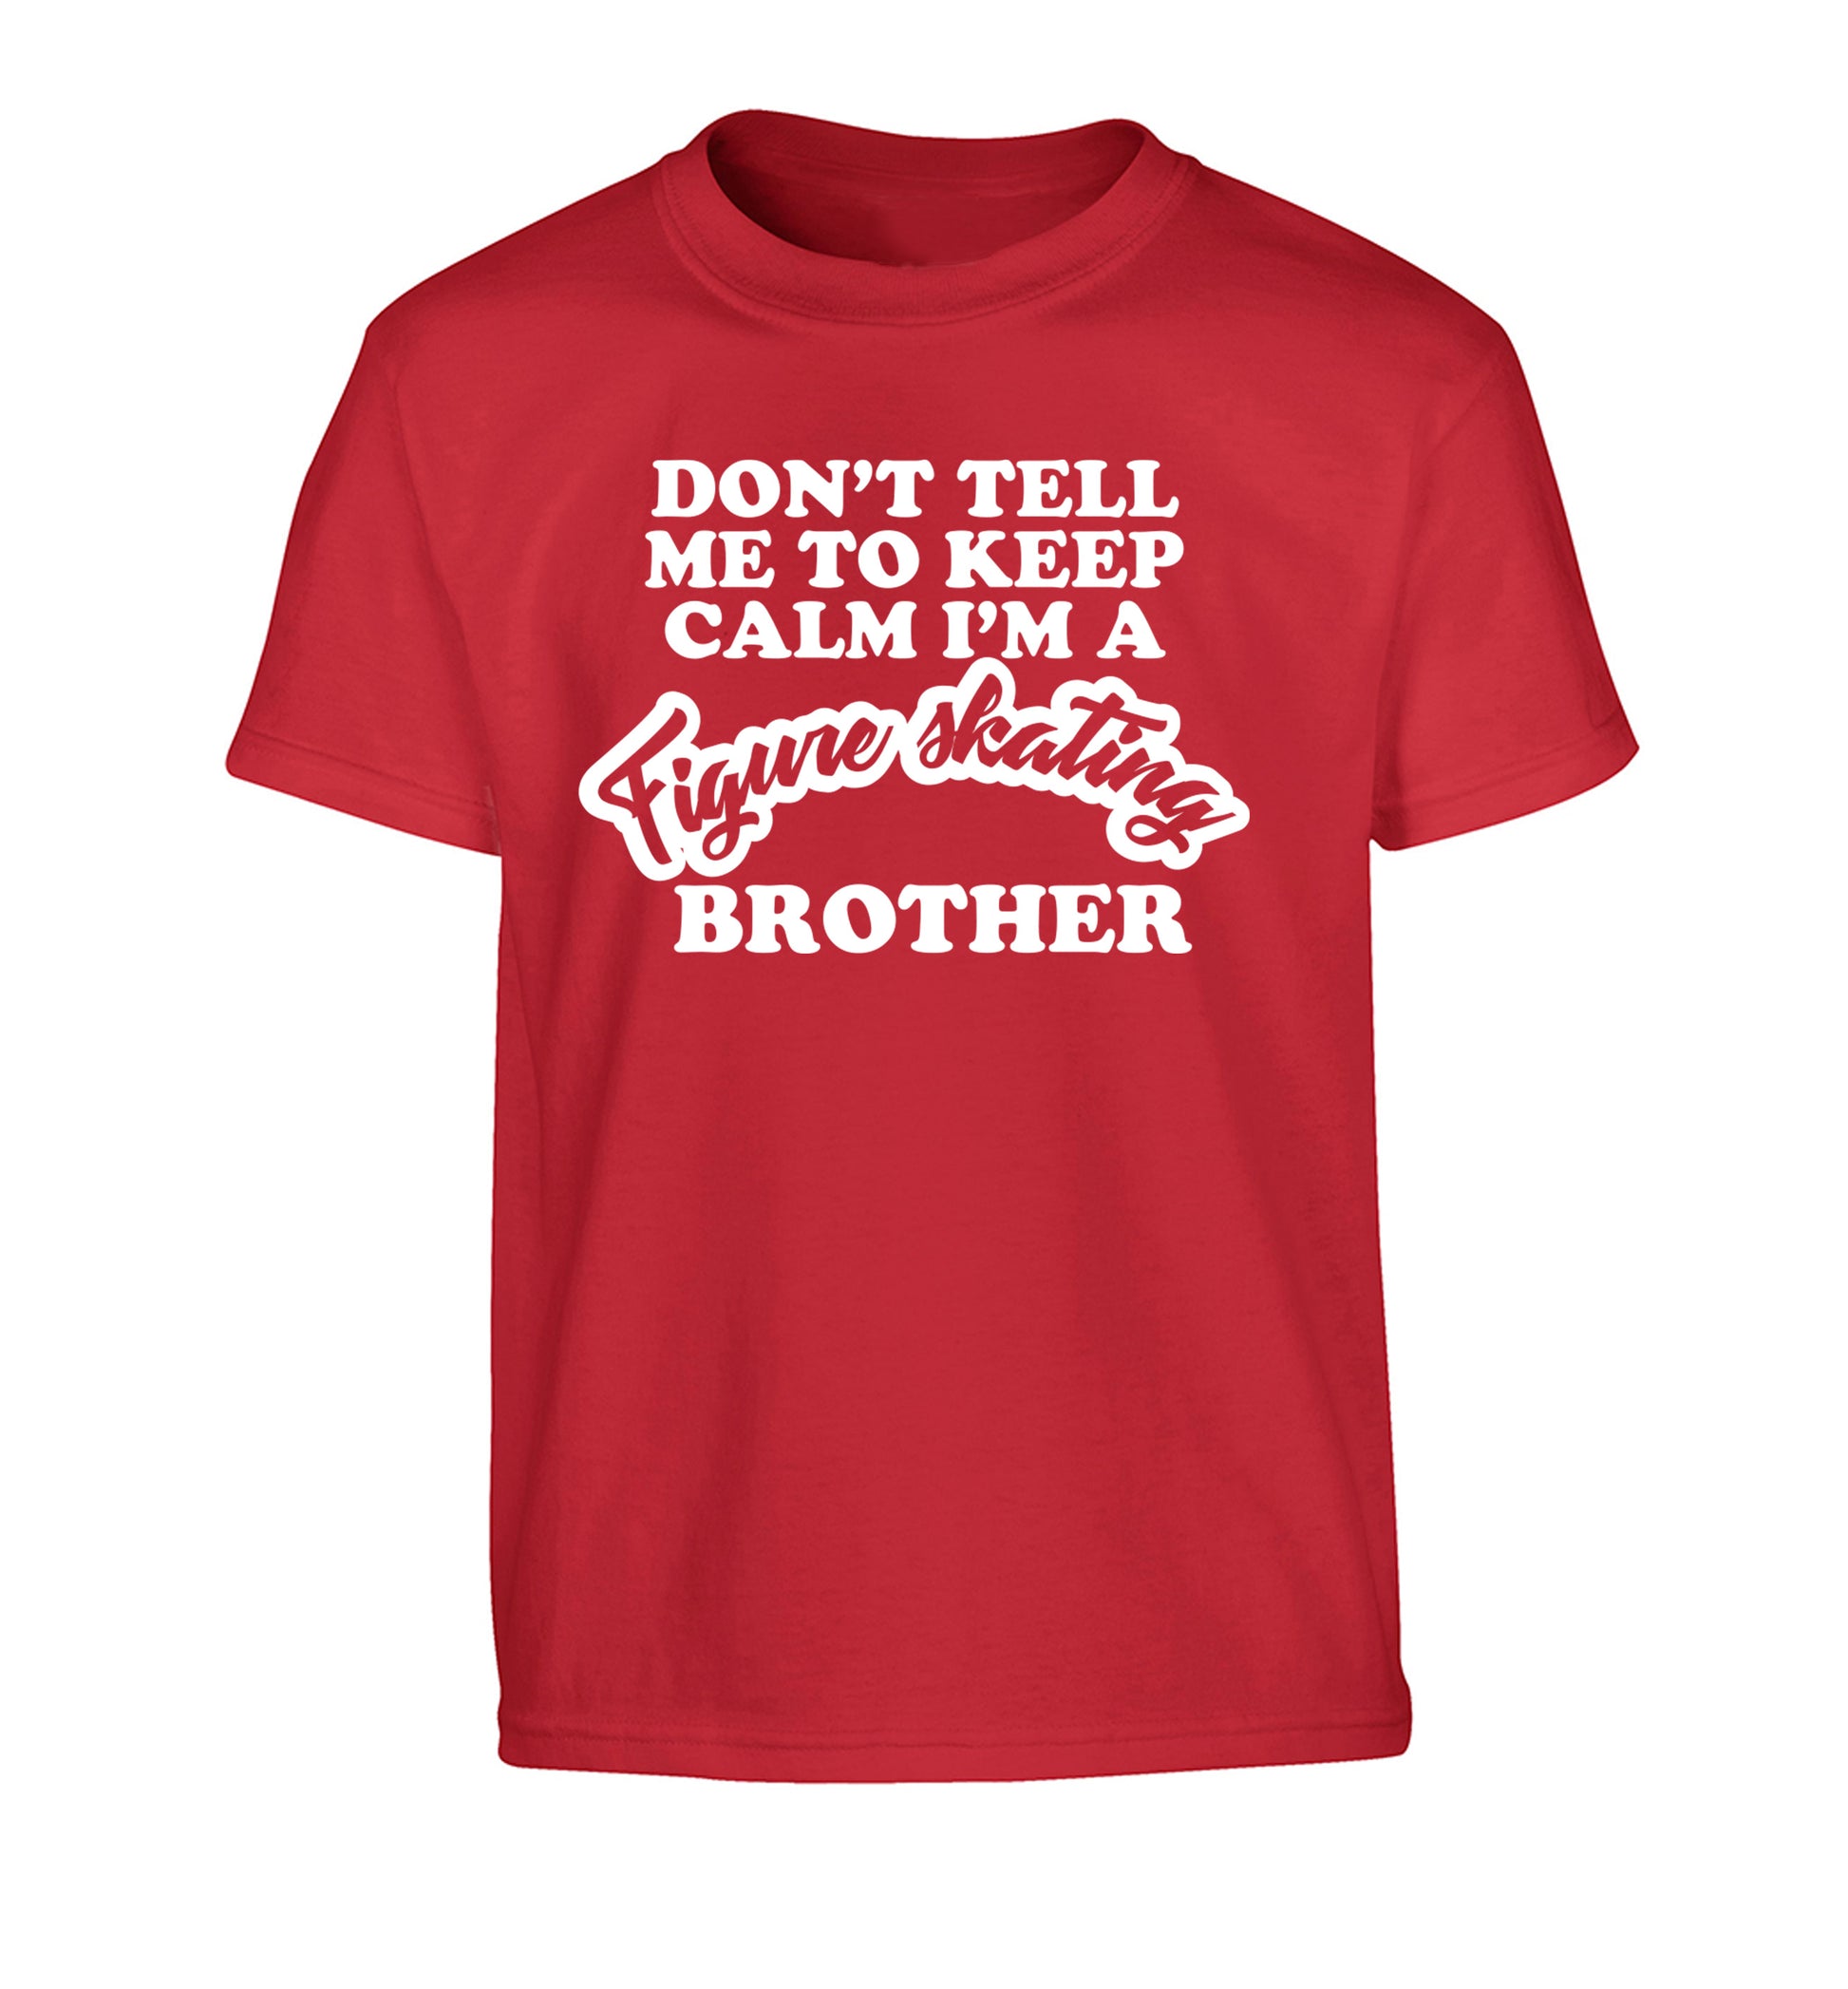 Don't tell me to keep calm I'm a figure skating brother Children's red Tshirt 12-14 Years